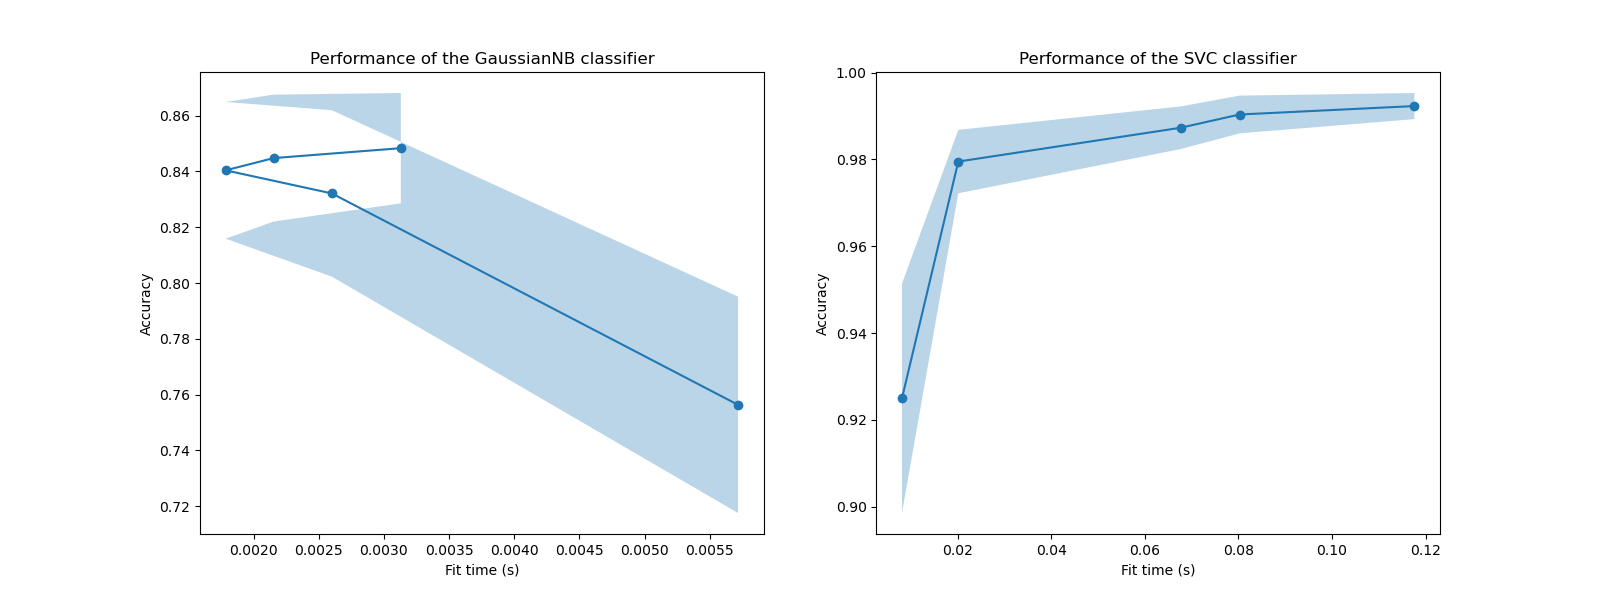 Performance of the GaussianNB classifier, Performance of the SVC classifier